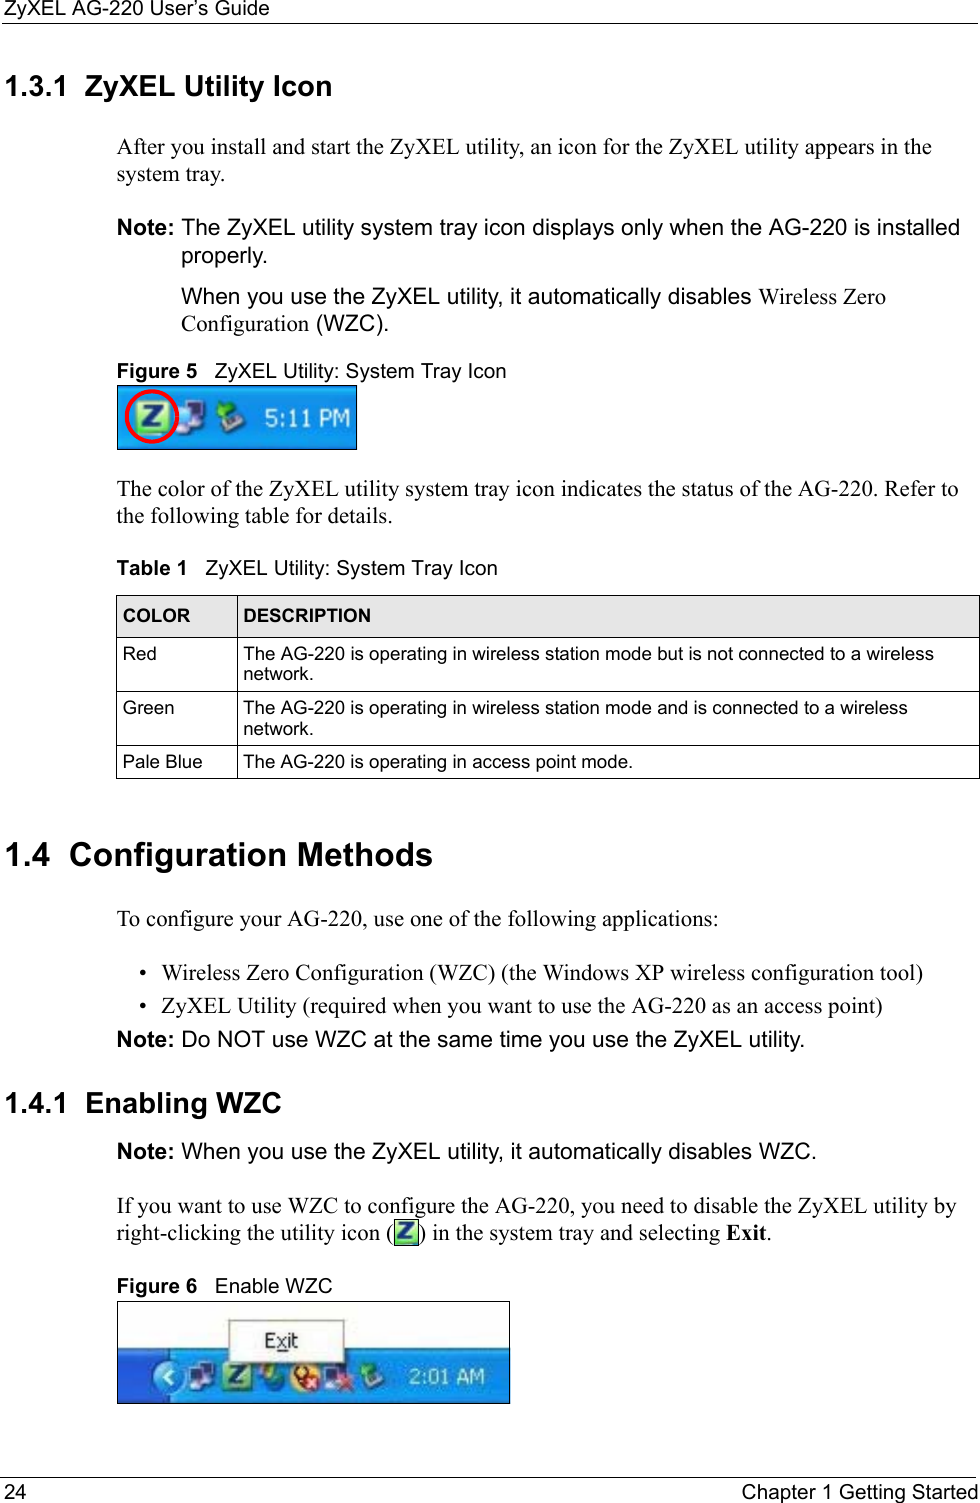 ZyXEL AG-220 User’s Guide24 Chapter 1 Getting Started1.3.1  ZyXEL Utility IconAfter you install and start the ZyXEL utility, an icon for the ZyXEL utility appears in the system tray.Note: The ZyXEL utility system tray icon displays only when the AG-220 is installed properly.When you use the ZyXEL utility, it automatically disables Wireless Zero Configuration (WZC).Figure 5   ZyXEL Utility: System Tray Icon The color of the ZyXEL utility system tray icon indicates the status of the AG-220. Refer to the following table for details. 1.4  Configuration Methods   To configure your AG-220, use one of the following applications:• Wireless Zero Configuration (WZC) (the Windows XP wireless configuration tool)• ZyXEL Utility (required when you want to use the AG-220 as an access point)Note: Do NOT use WZC at the same time you use the ZyXEL utility.1.4.1  Enabling WZC Note: When you use the ZyXEL utility, it automatically disables WZC. If you want to use WZC to configure the AG-220, you need to disable the ZyXEL utility by right-clicking the utility icon ( ) in the system tray and selecting Exit. Figure 6   Enable WZCTable 1   ZyXEL Utility: System Tray Icon COLOR DESCRIPTIONRed The AG-220 is operating in wireless station mode but is not connected to a wireless network.Green The AG-220 is operating in wireless station mode and is connected to a wireless network.Pale Blue The AG-220 is operating in access point mode.